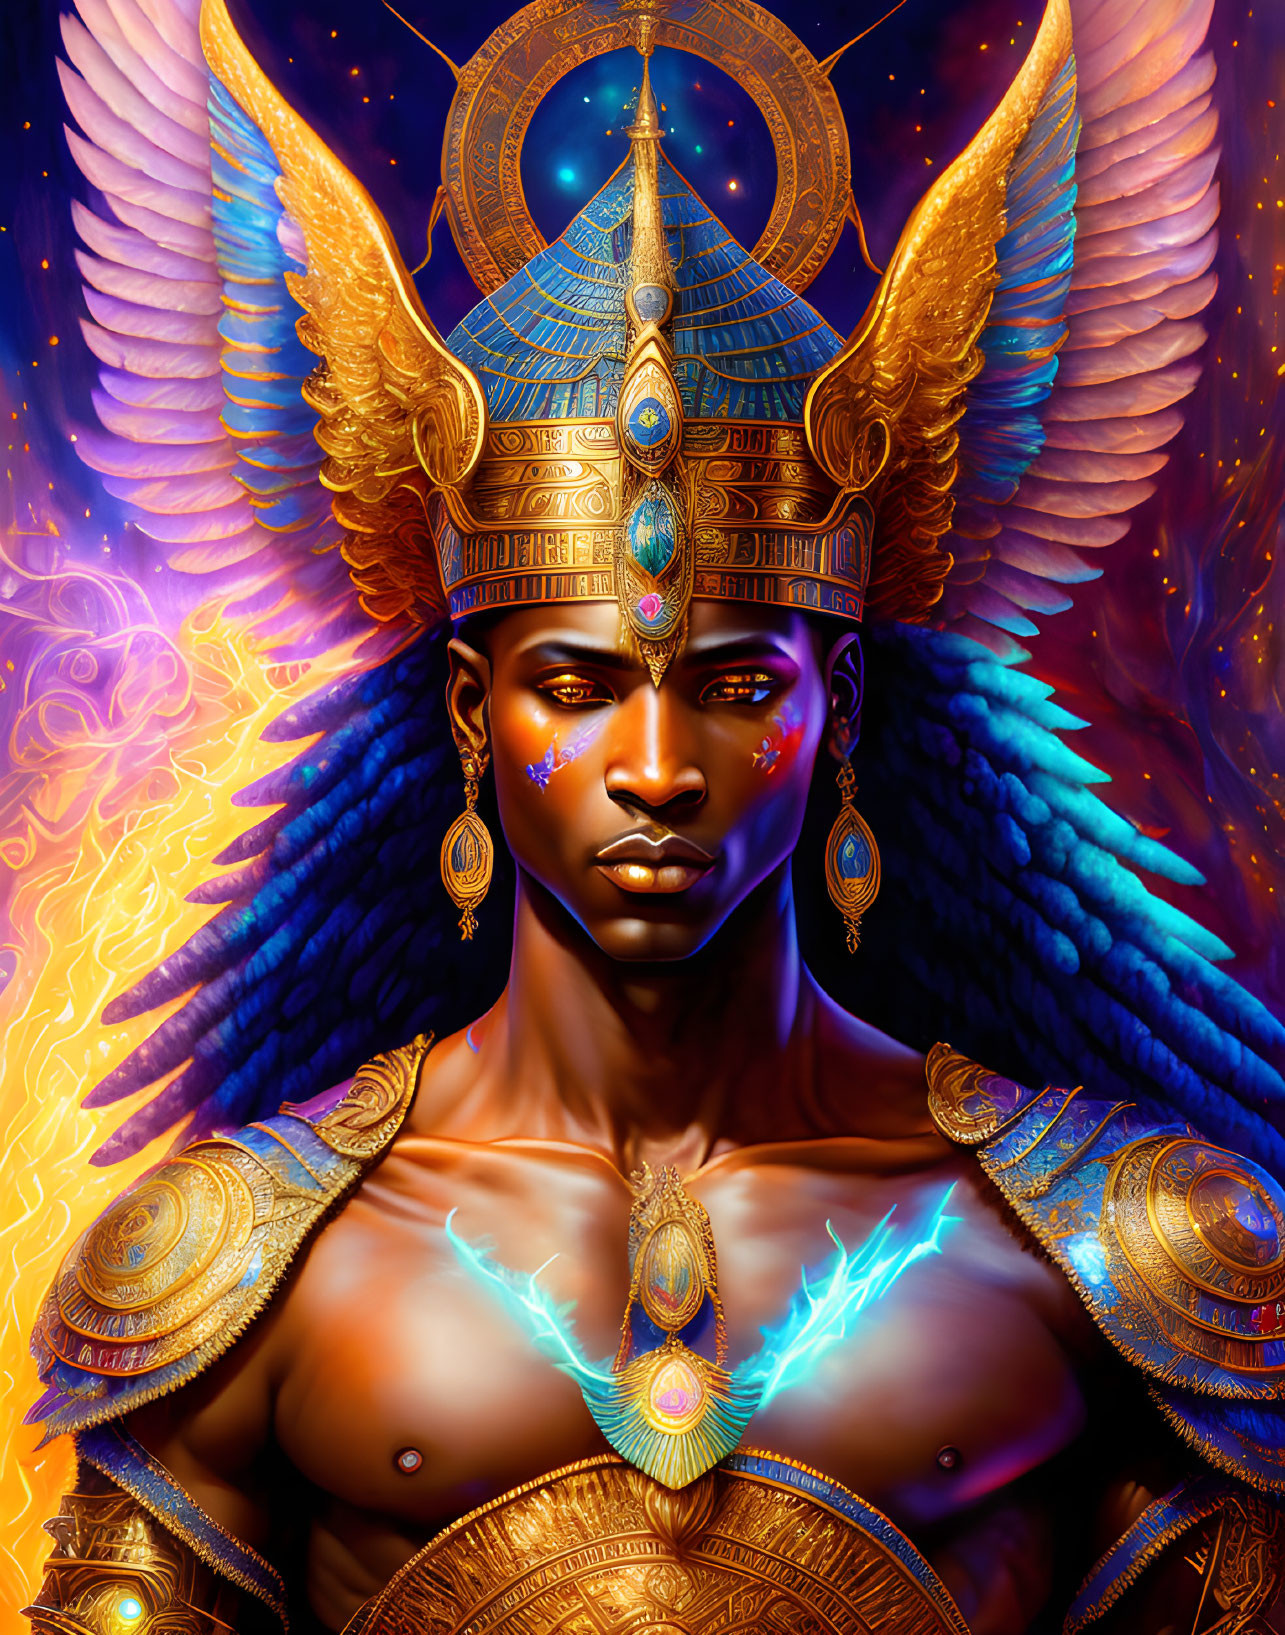 Regal figure in golden armor with celestial symbols and fiery wings